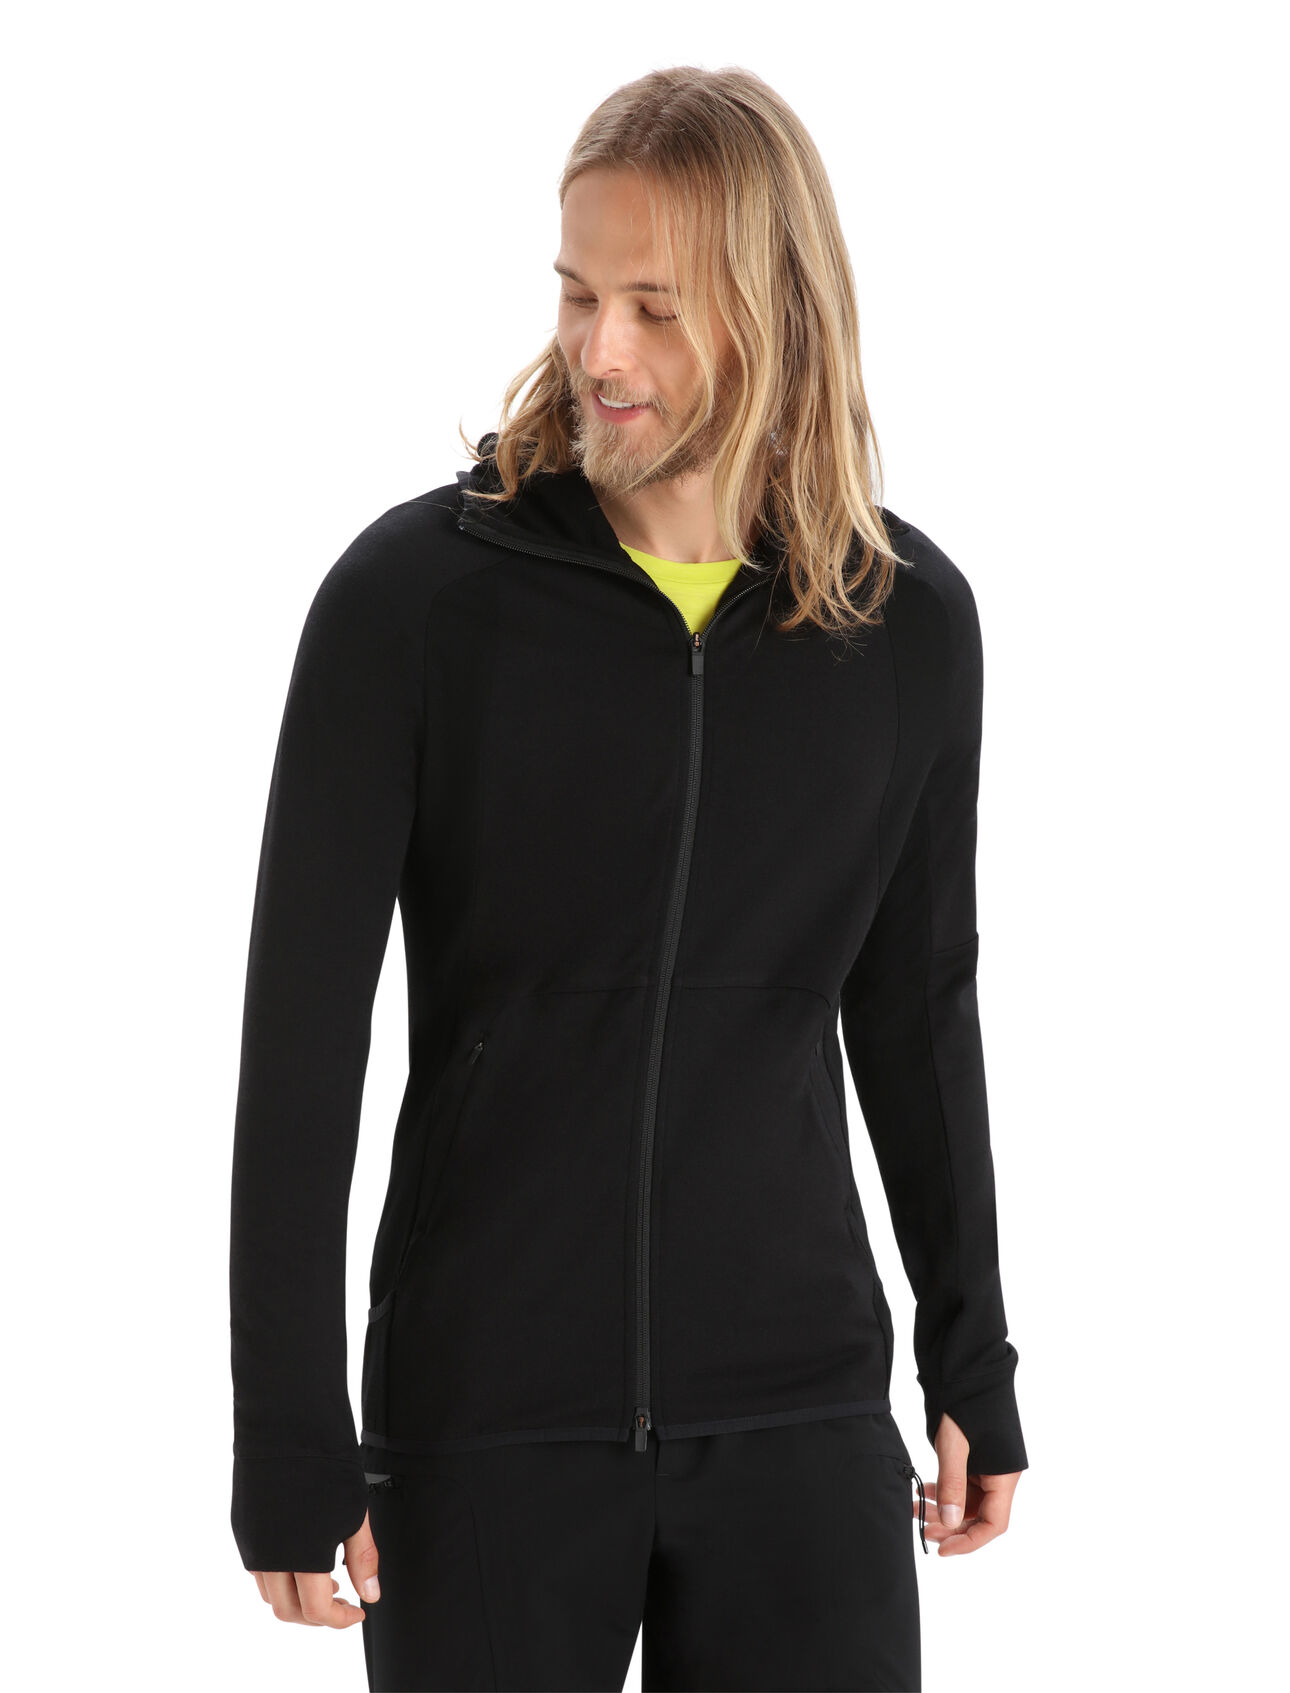 Mens ZoneKnit™ Merino Long Sleeve Zip Hoodie A midweight hoodie designed to balance warmth and breathability while on the move, the ZoneKnit™ Long Sleeve Zip Hood jersey fabric with strategic panels of eyelet mesh for enhanced airflow.